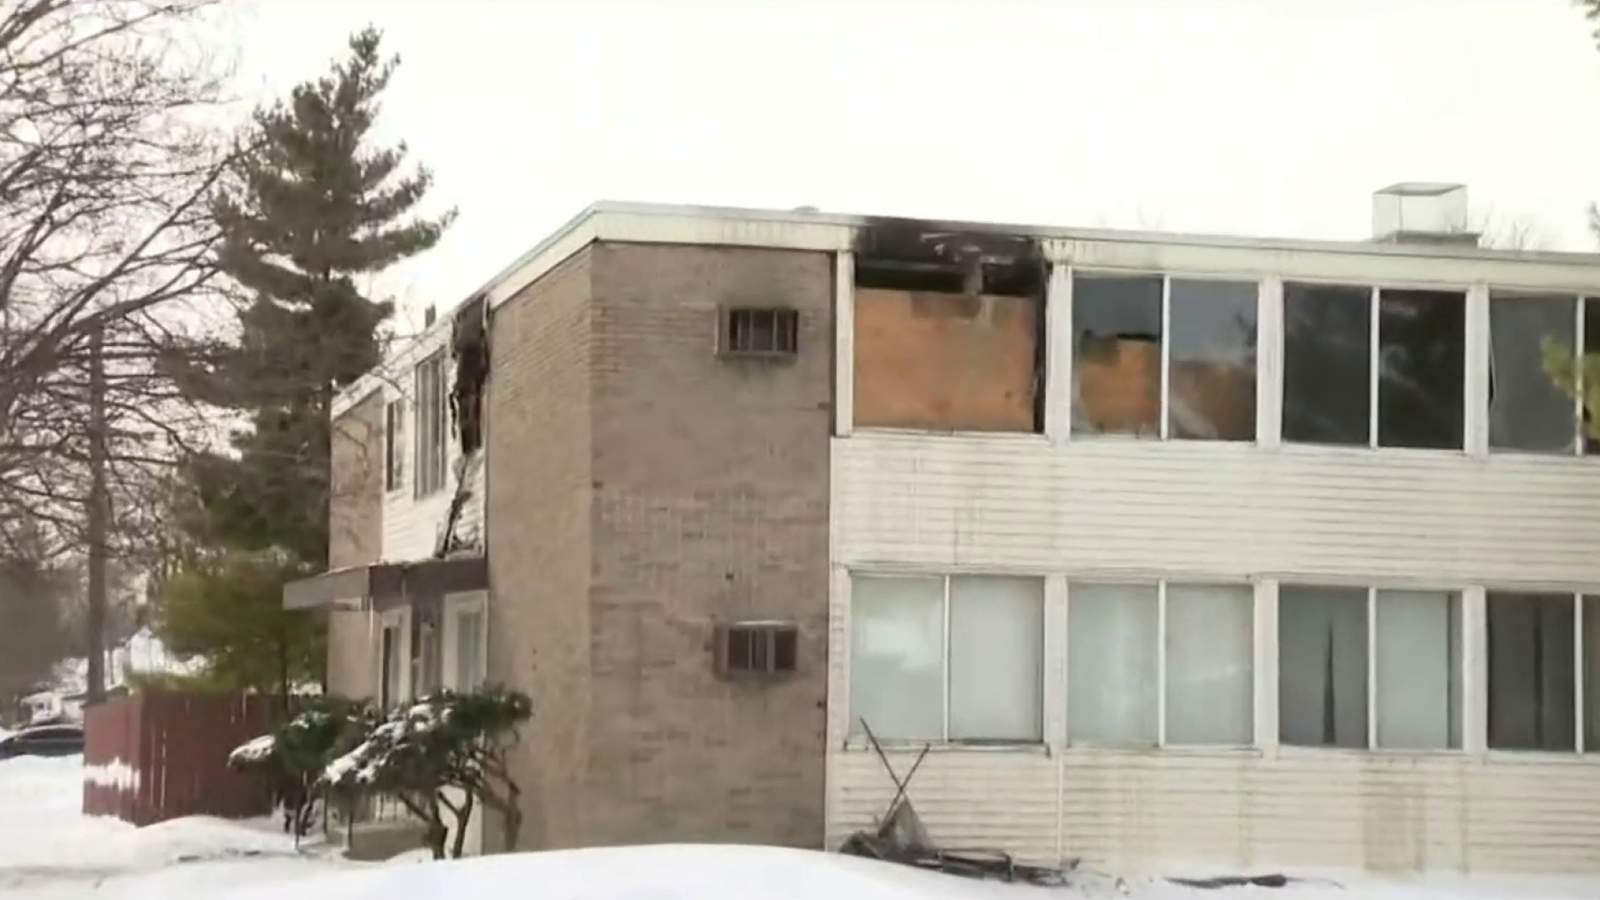 Detroit apartment fire that injured 3 likely caused by stoves used for heat